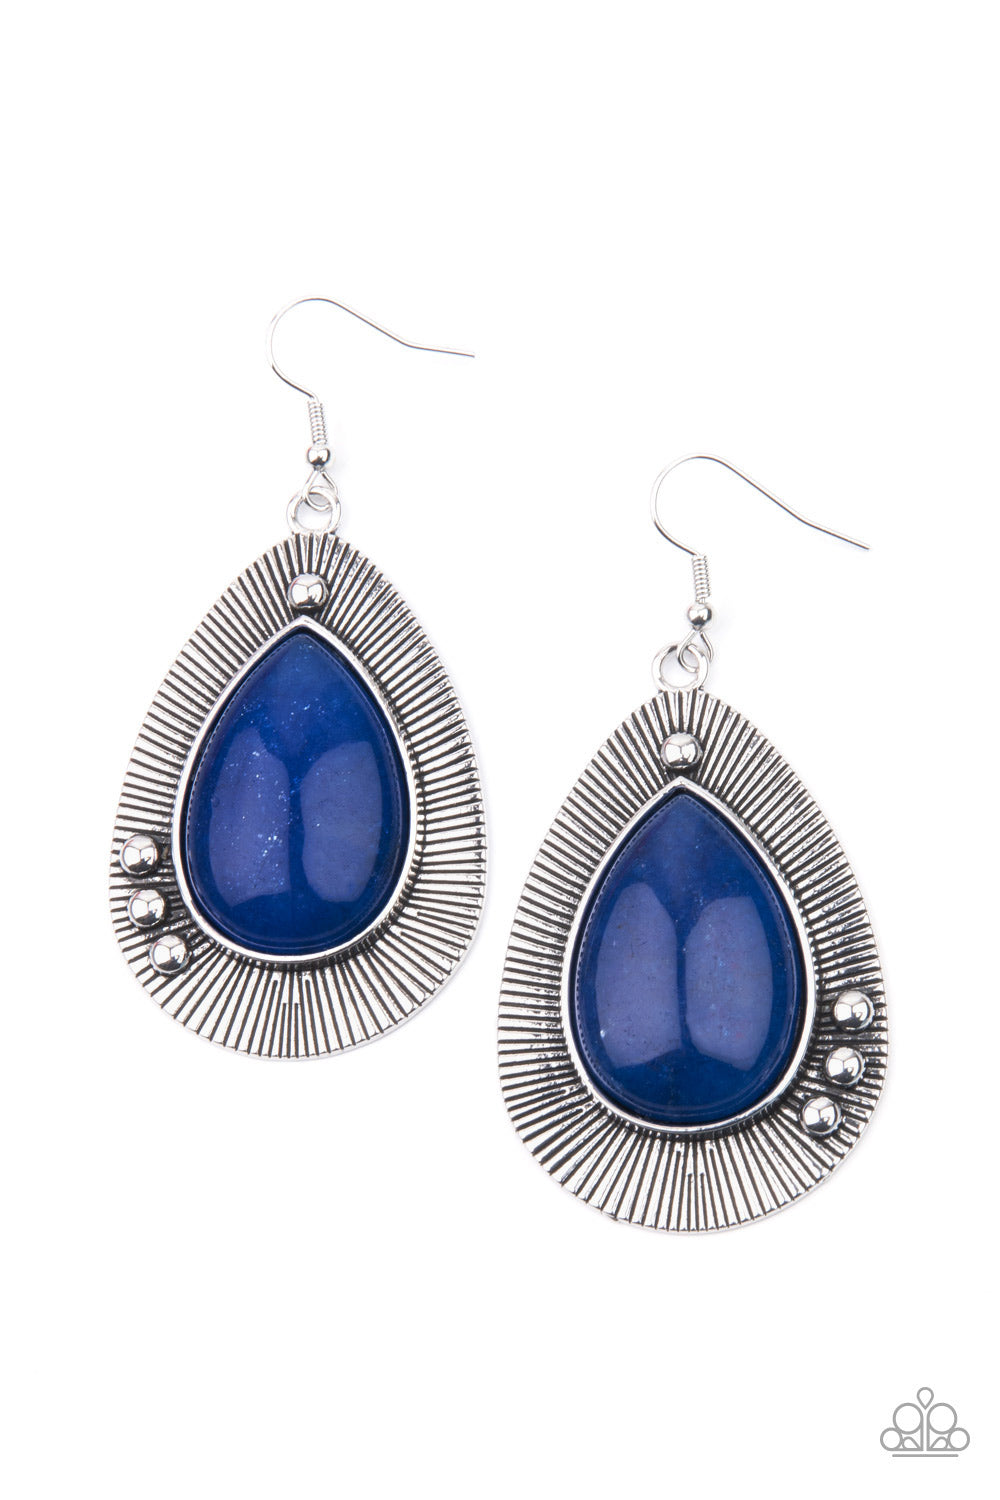 Paparazzi Accessories Western Fantasy - Blue Earrings - Lady T Accessories